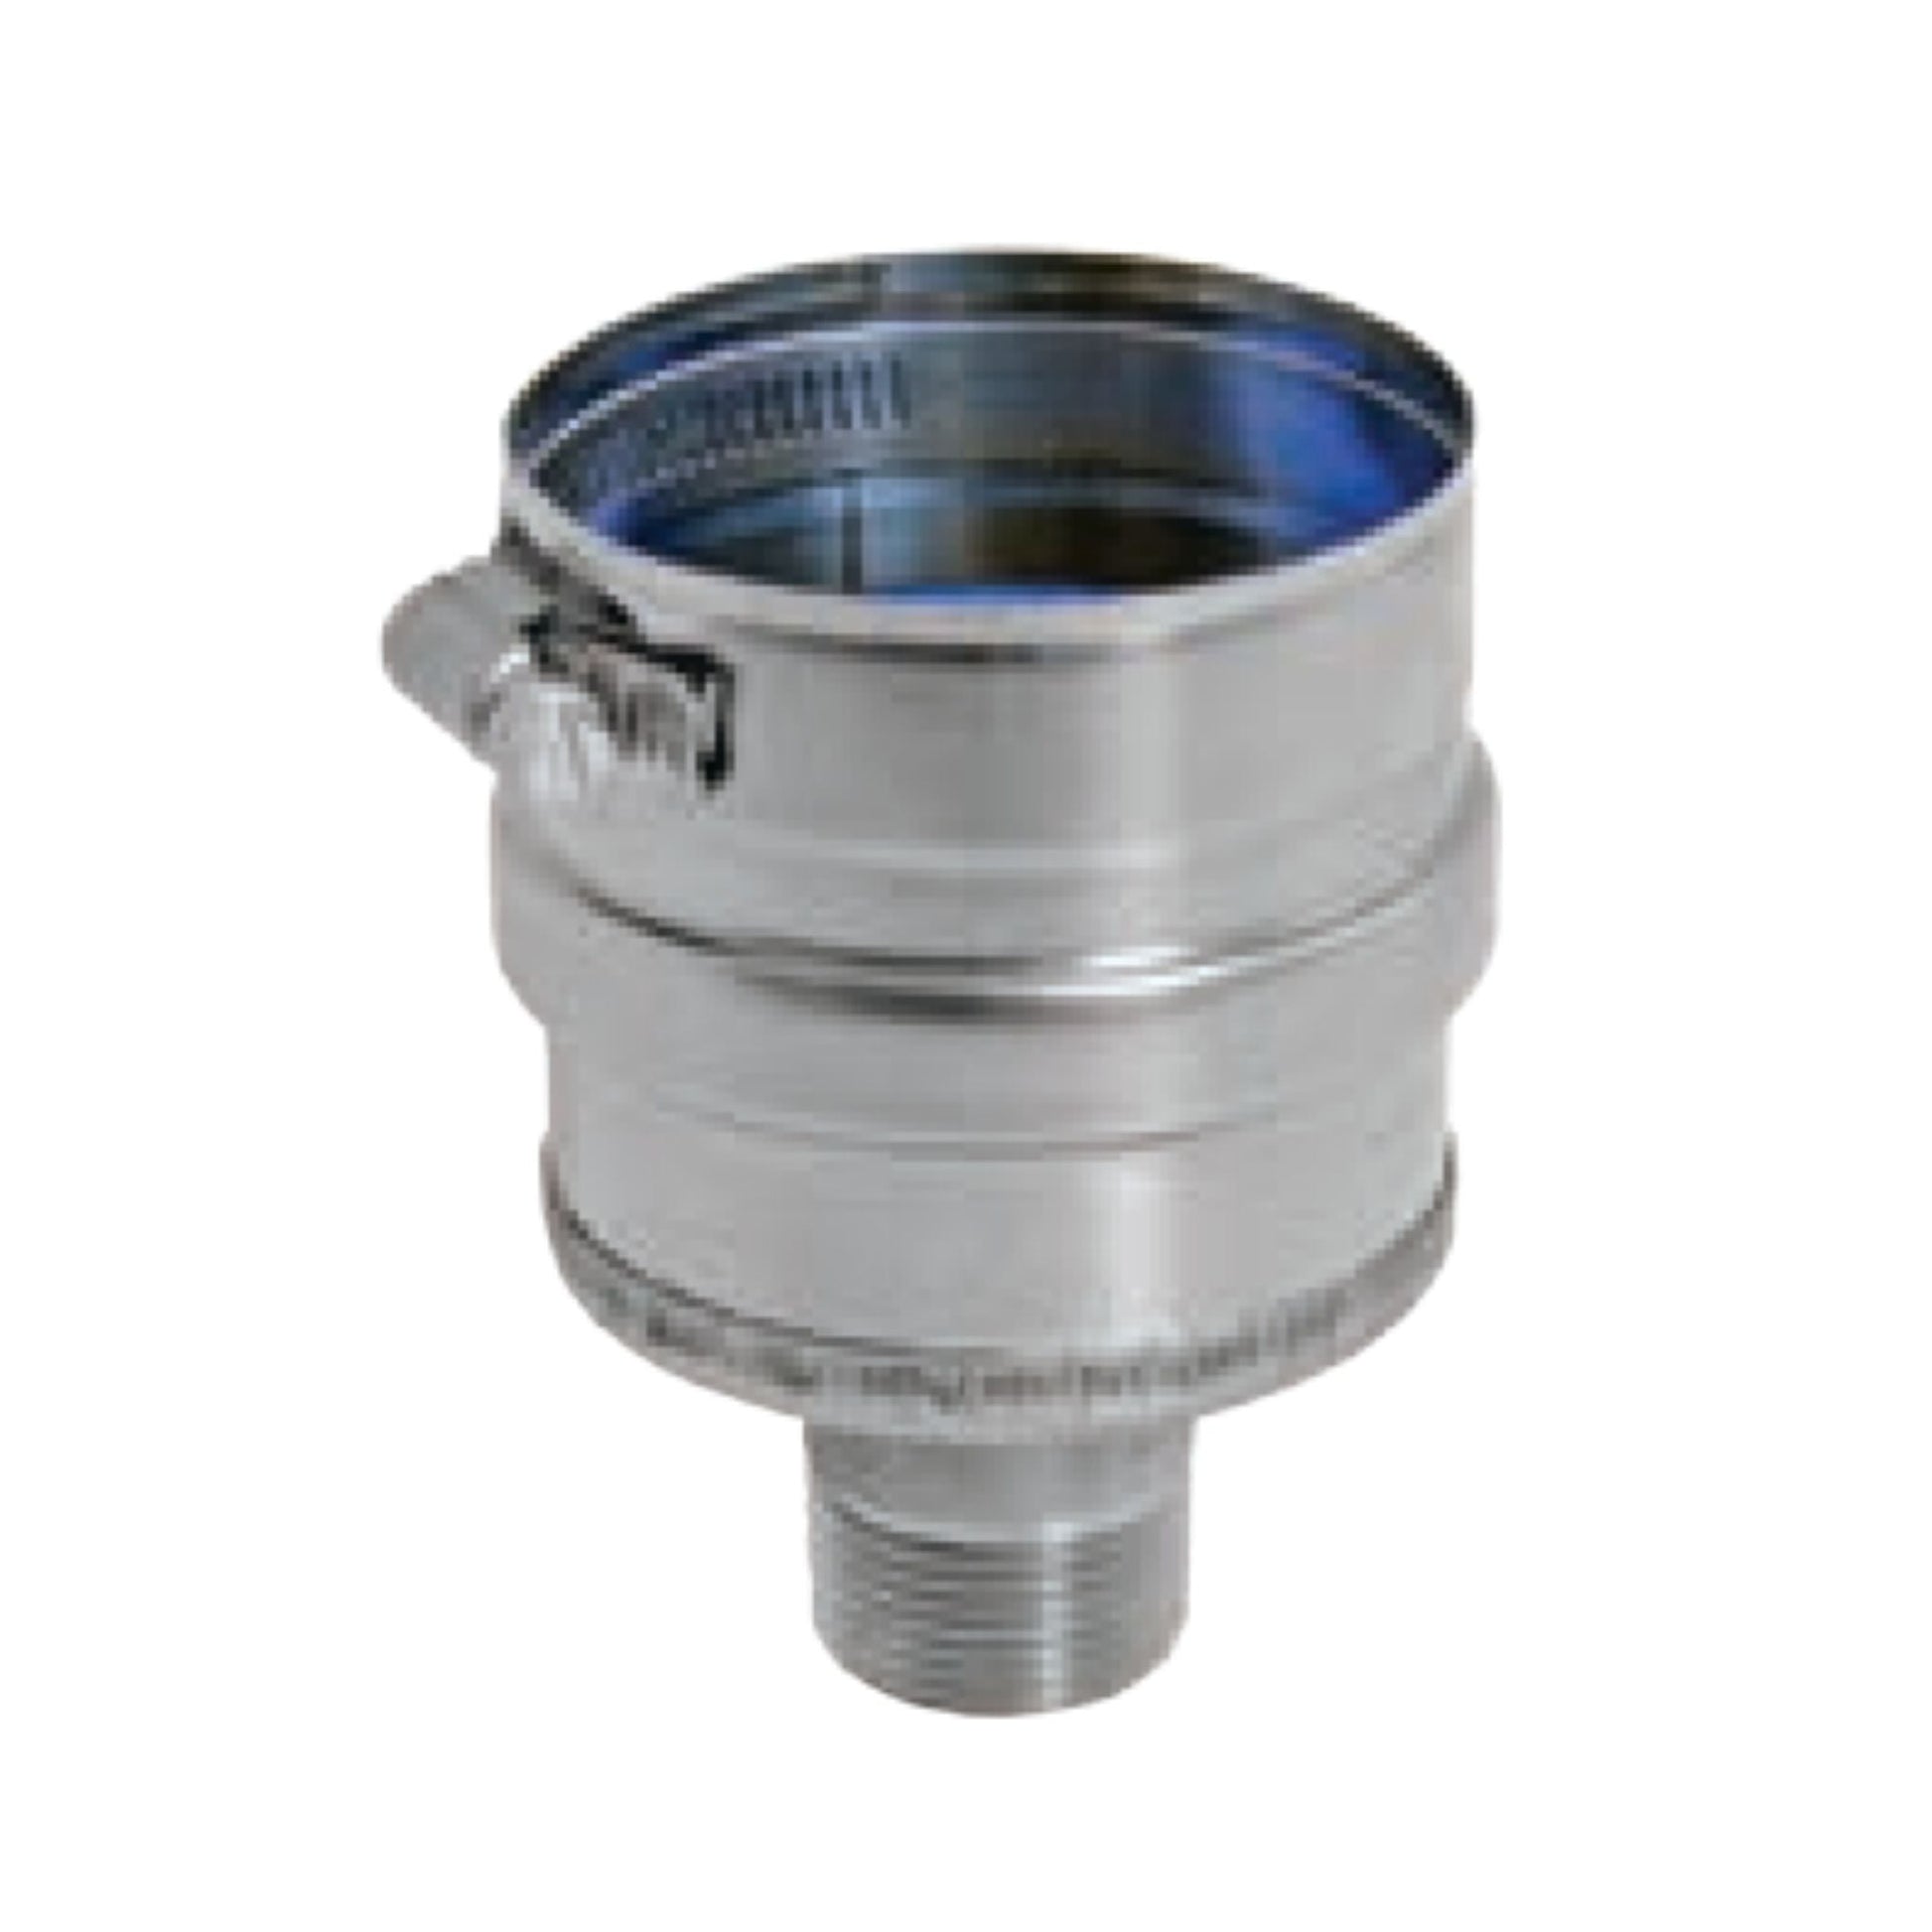 DuraVent FasNSeal 14" 316L Stainless Steel IPS Drain Fitting